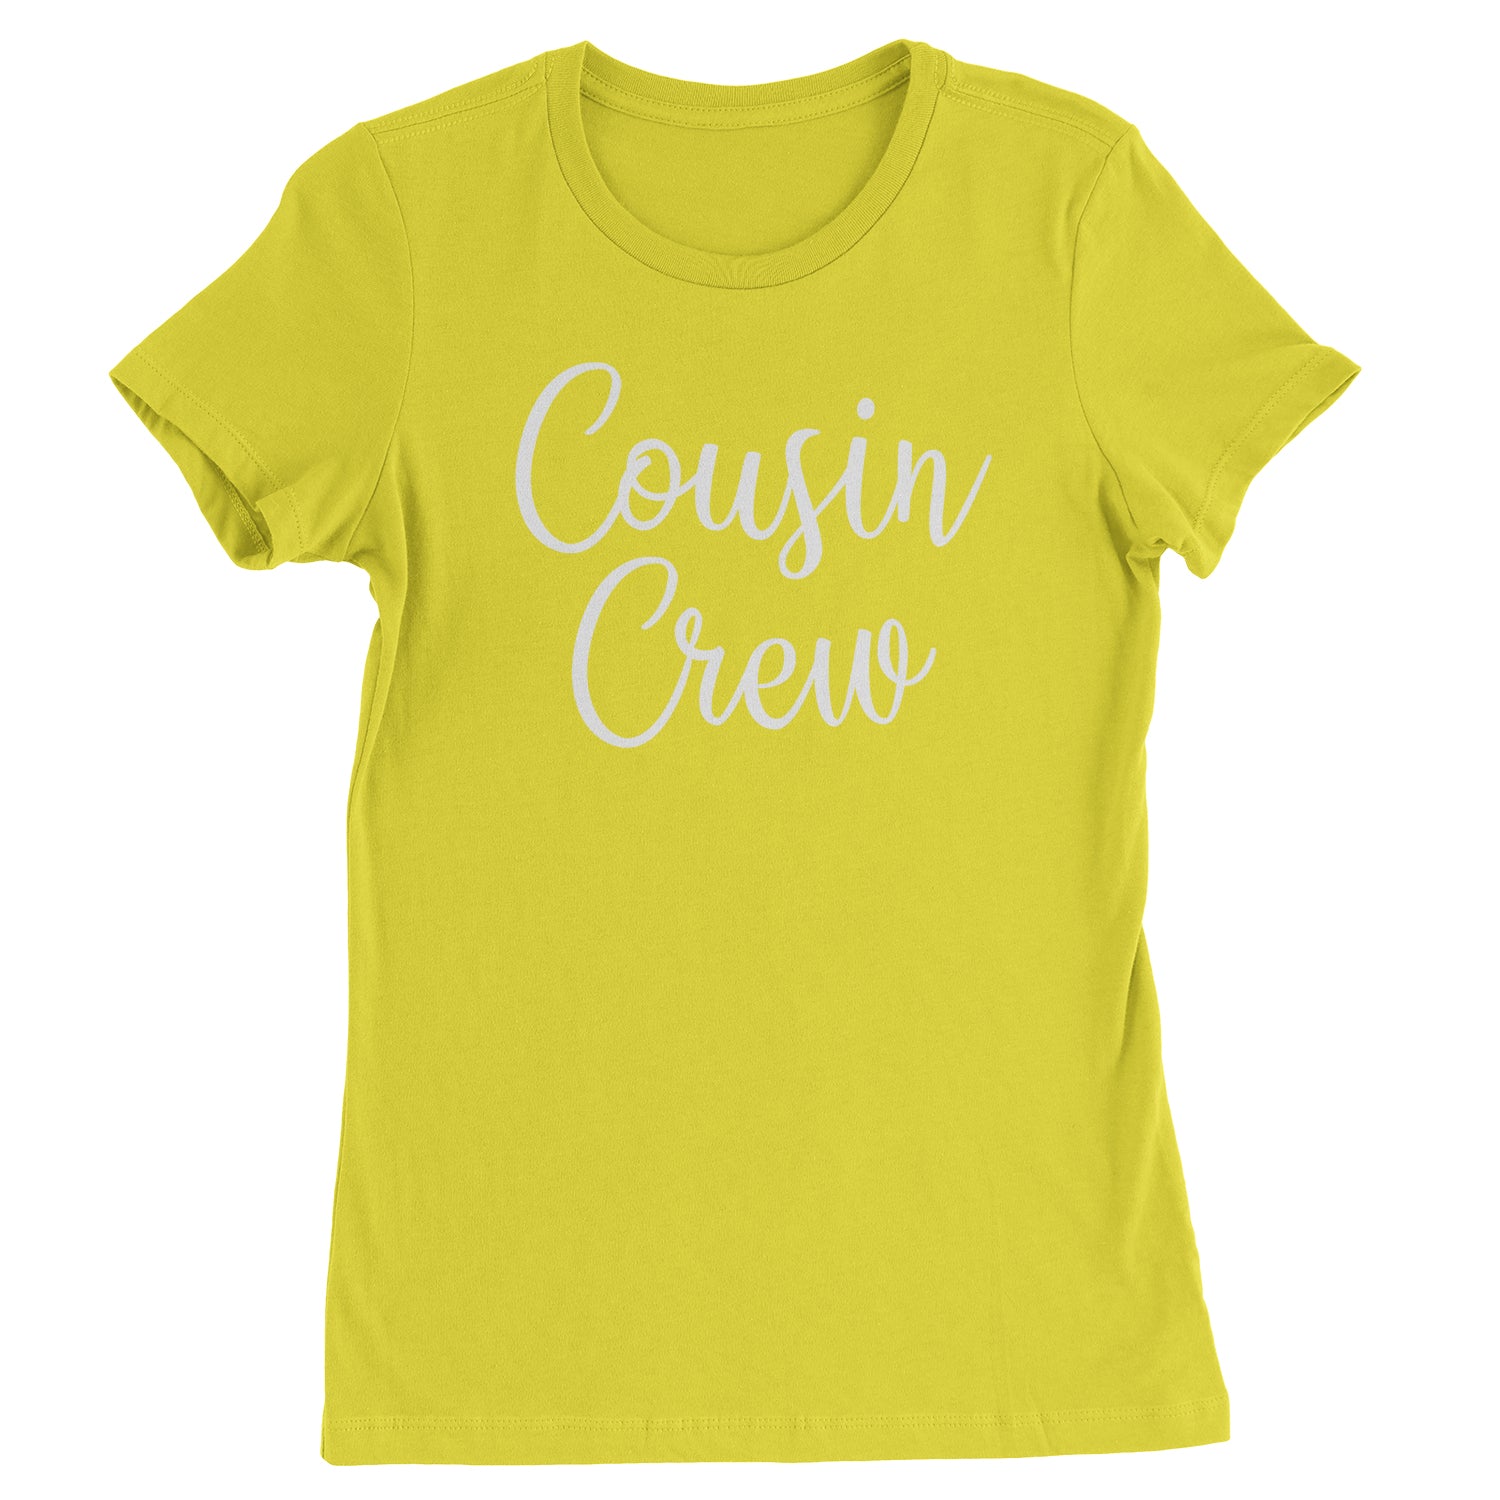 Cousin Crew Fun Family Outfit Womens T-shirt barbecue, bbq, cook, family, out, reunion by Expression Tees